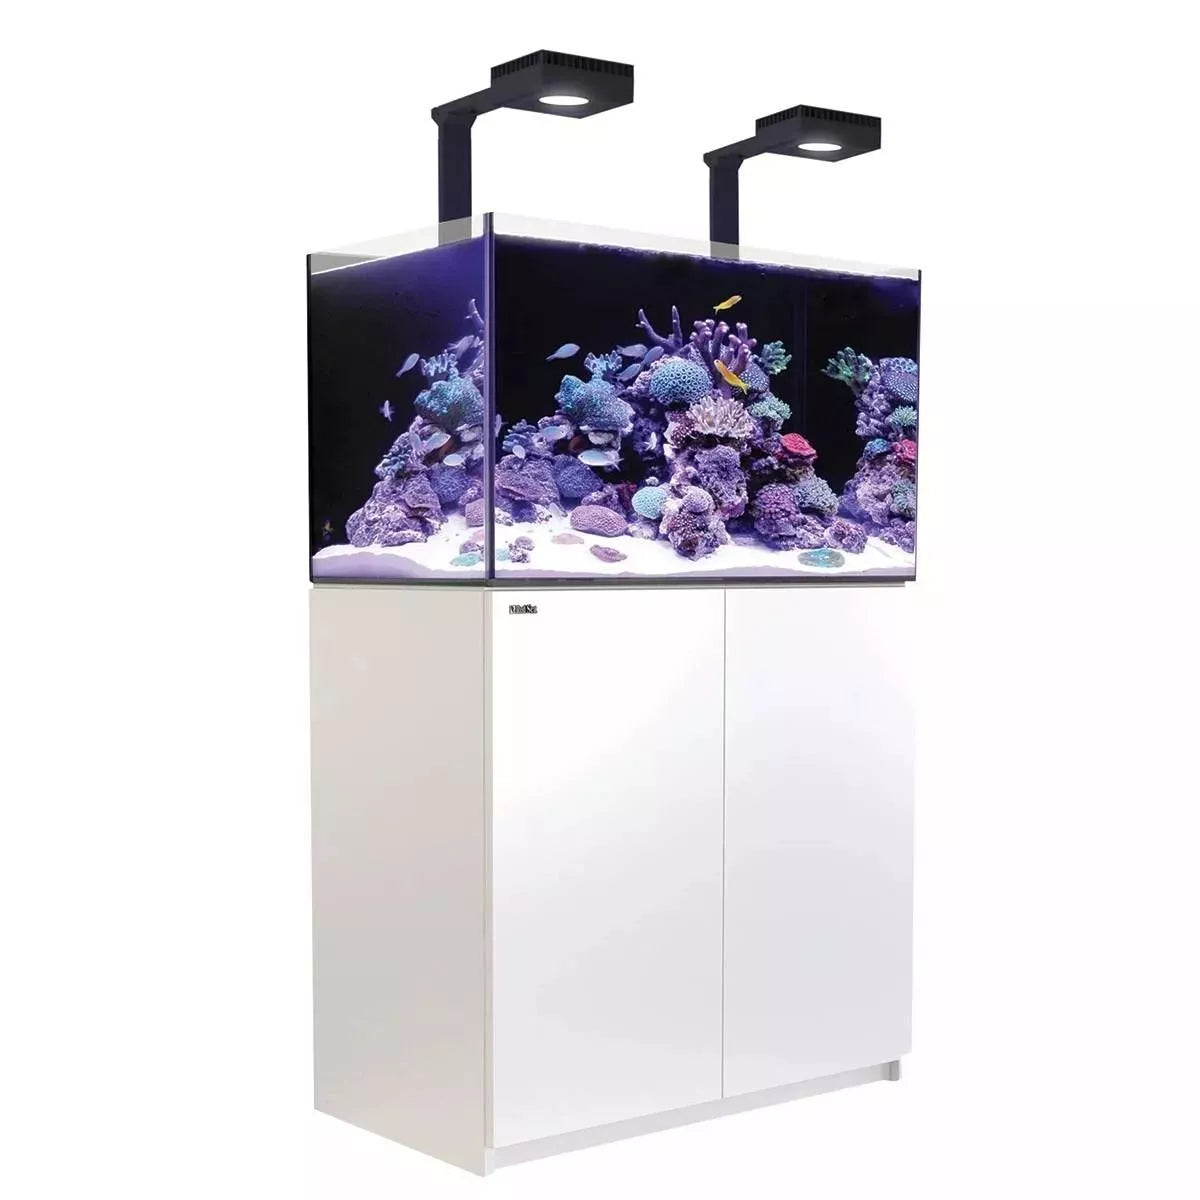 Reefer MAX 250 G2+ System (54 Gal) - Red Sea